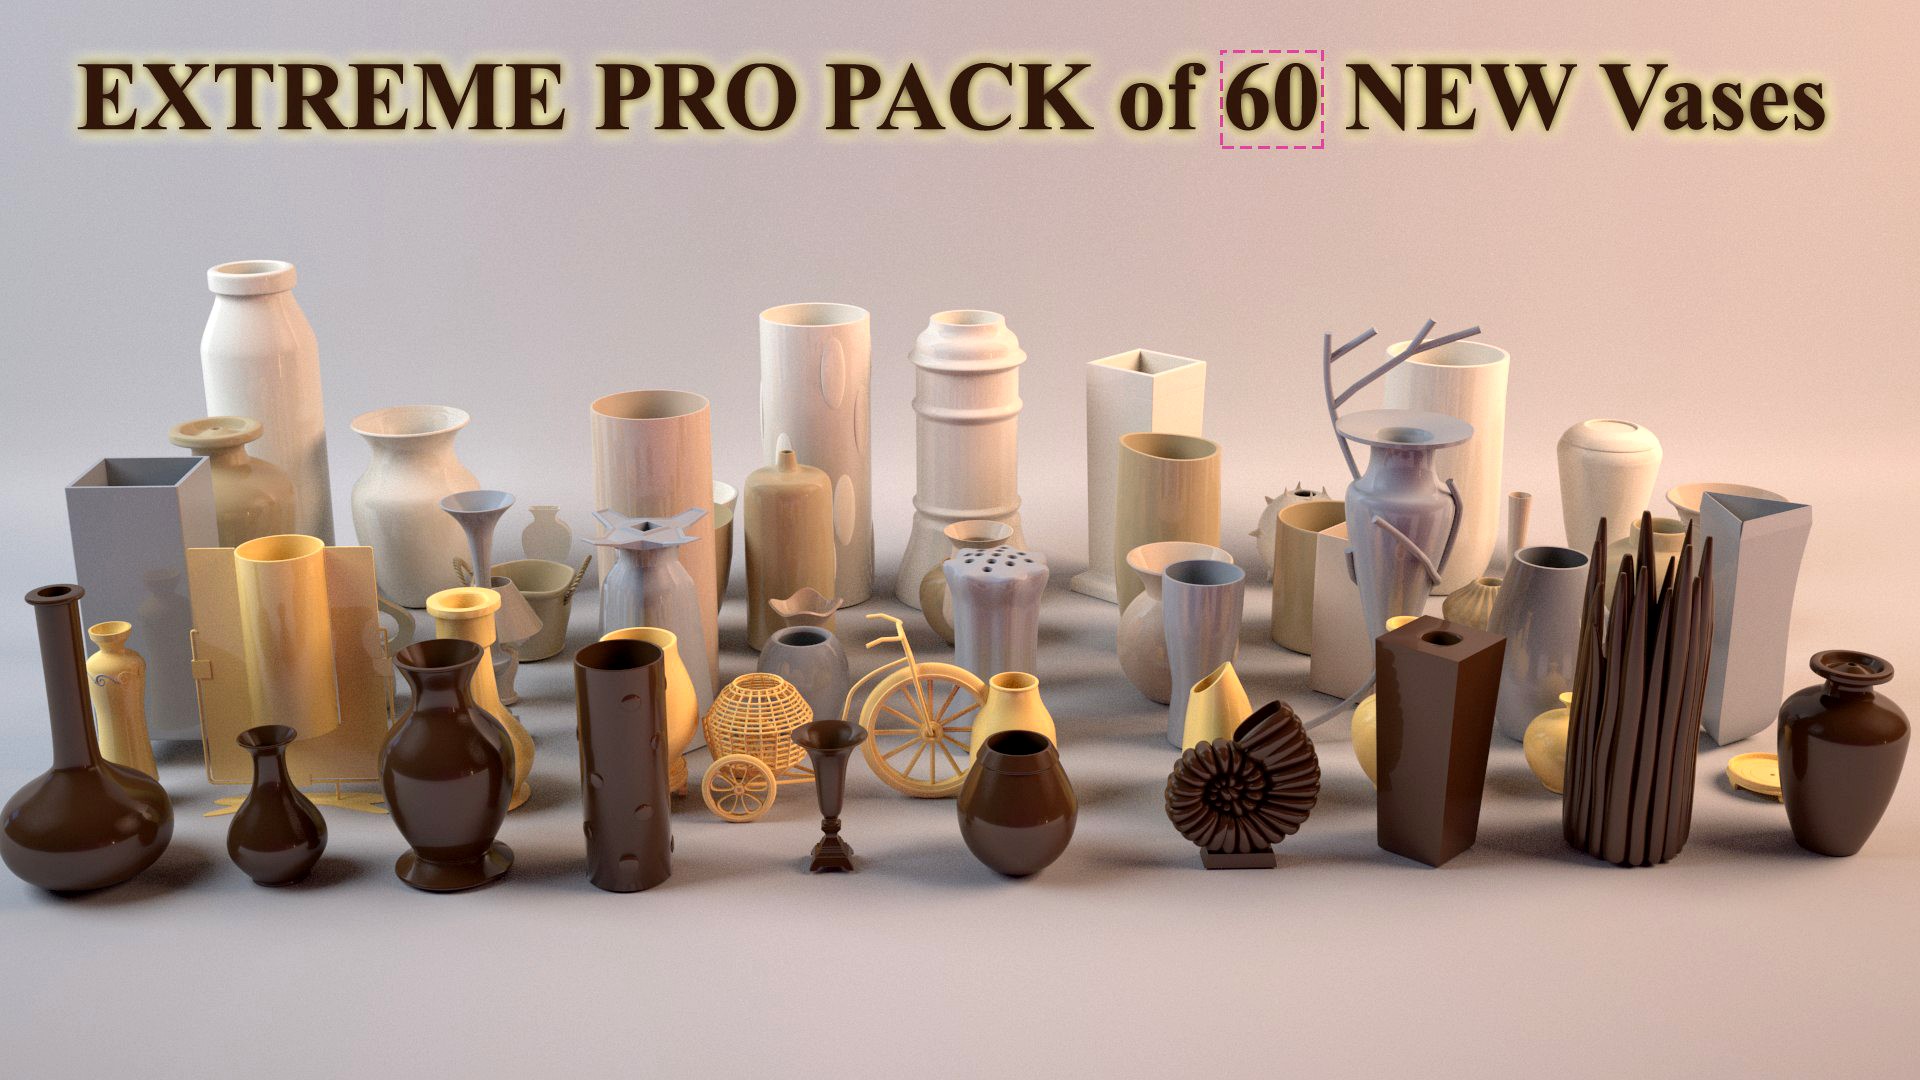 EXTREME PRO PACK of 60 NEW Vases